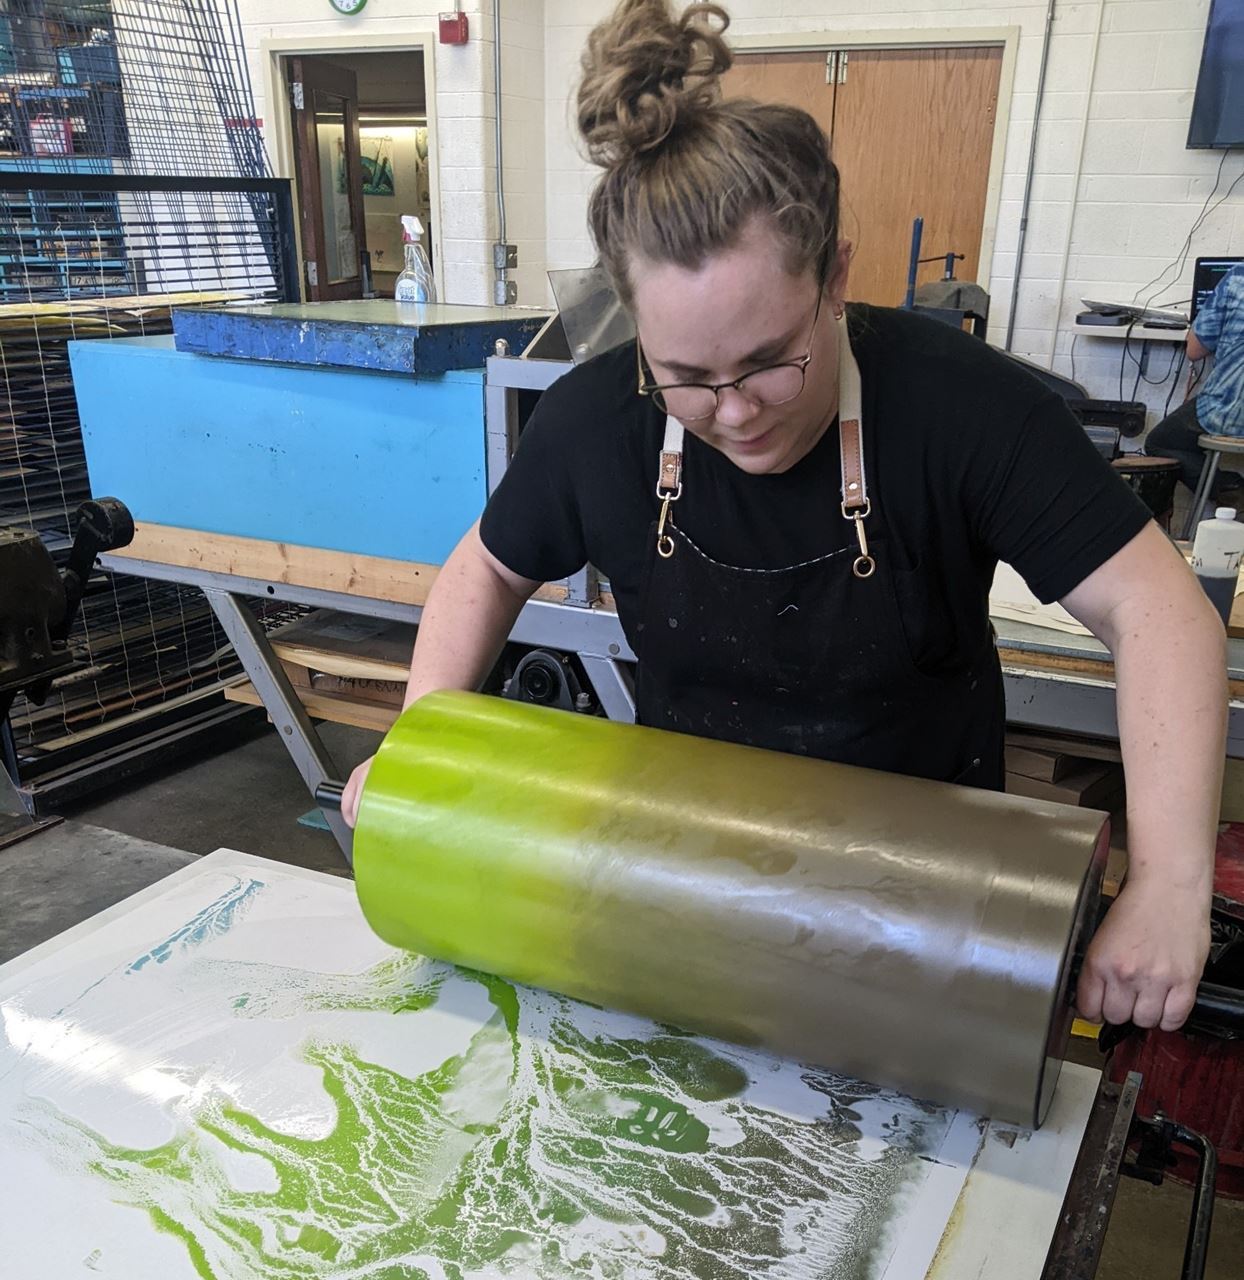 Instructor Kath Yarkosky inking up a photo litho plate using a large roller